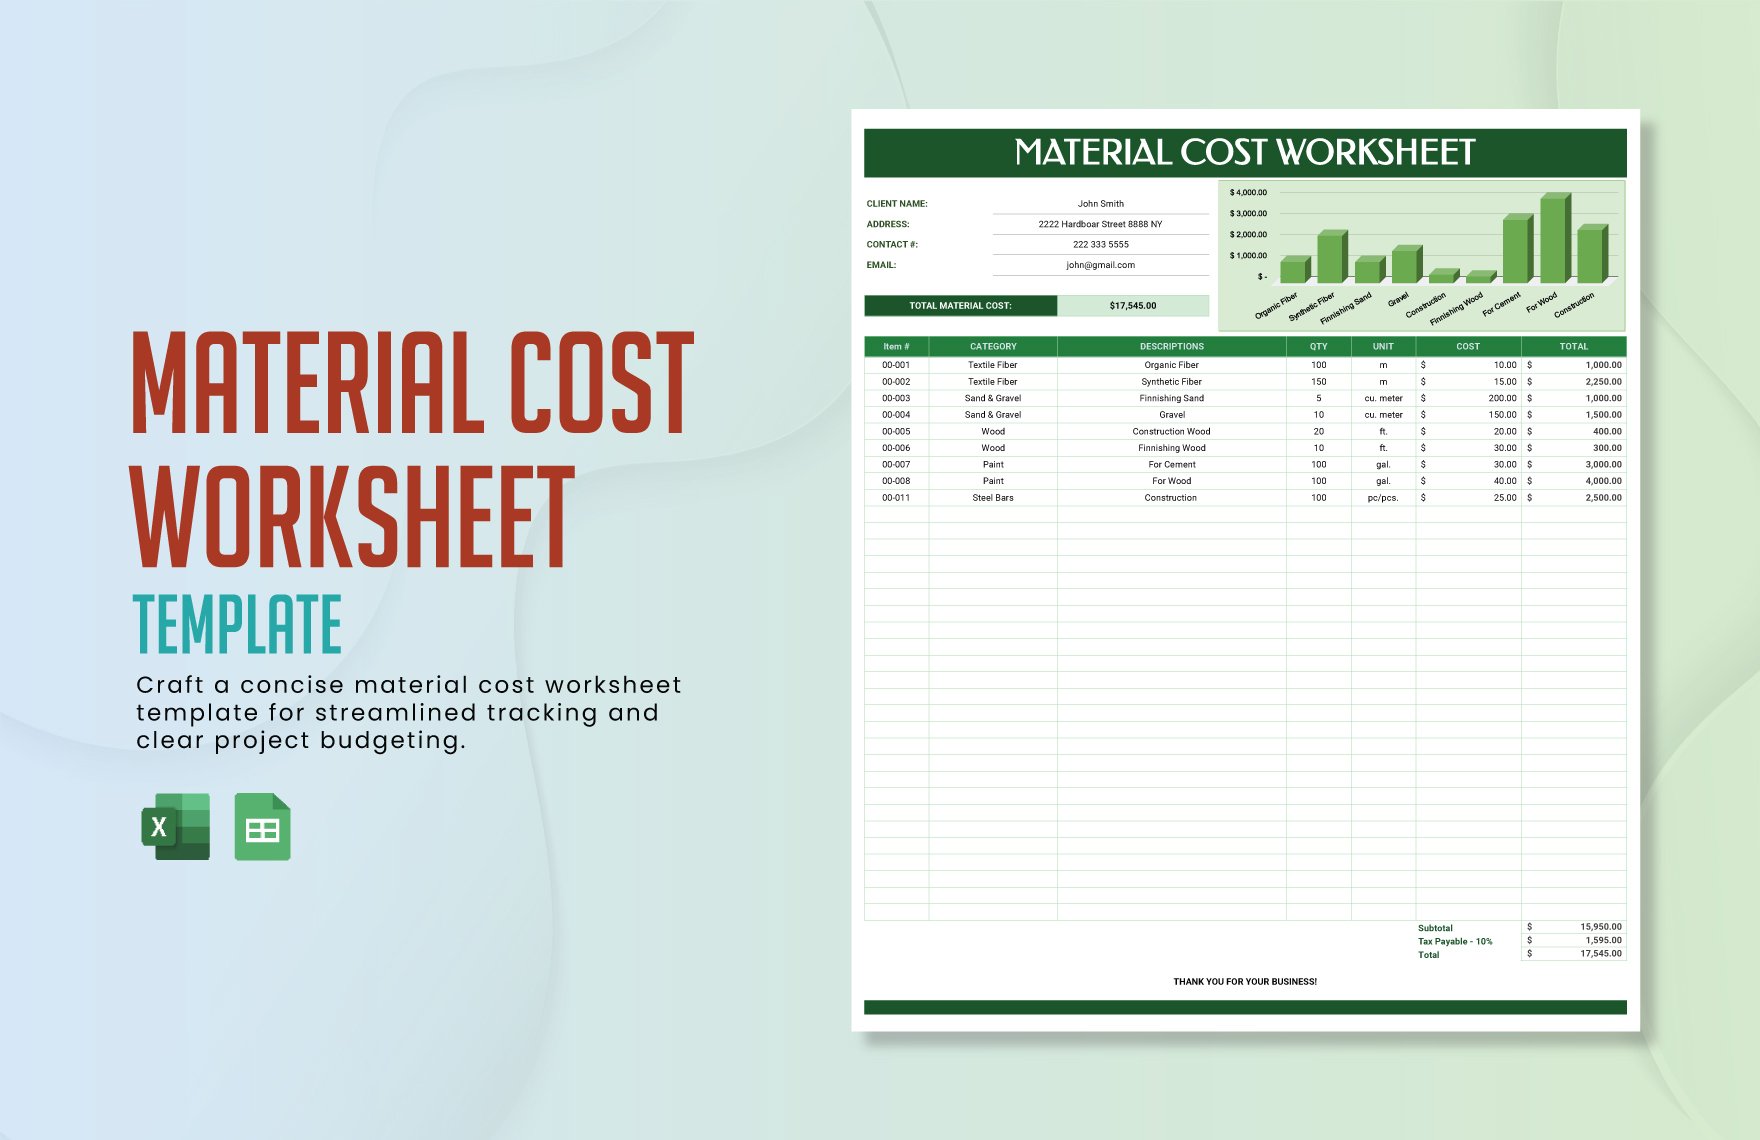 Material Cost Worksheet Template in Excel, Google Sheets